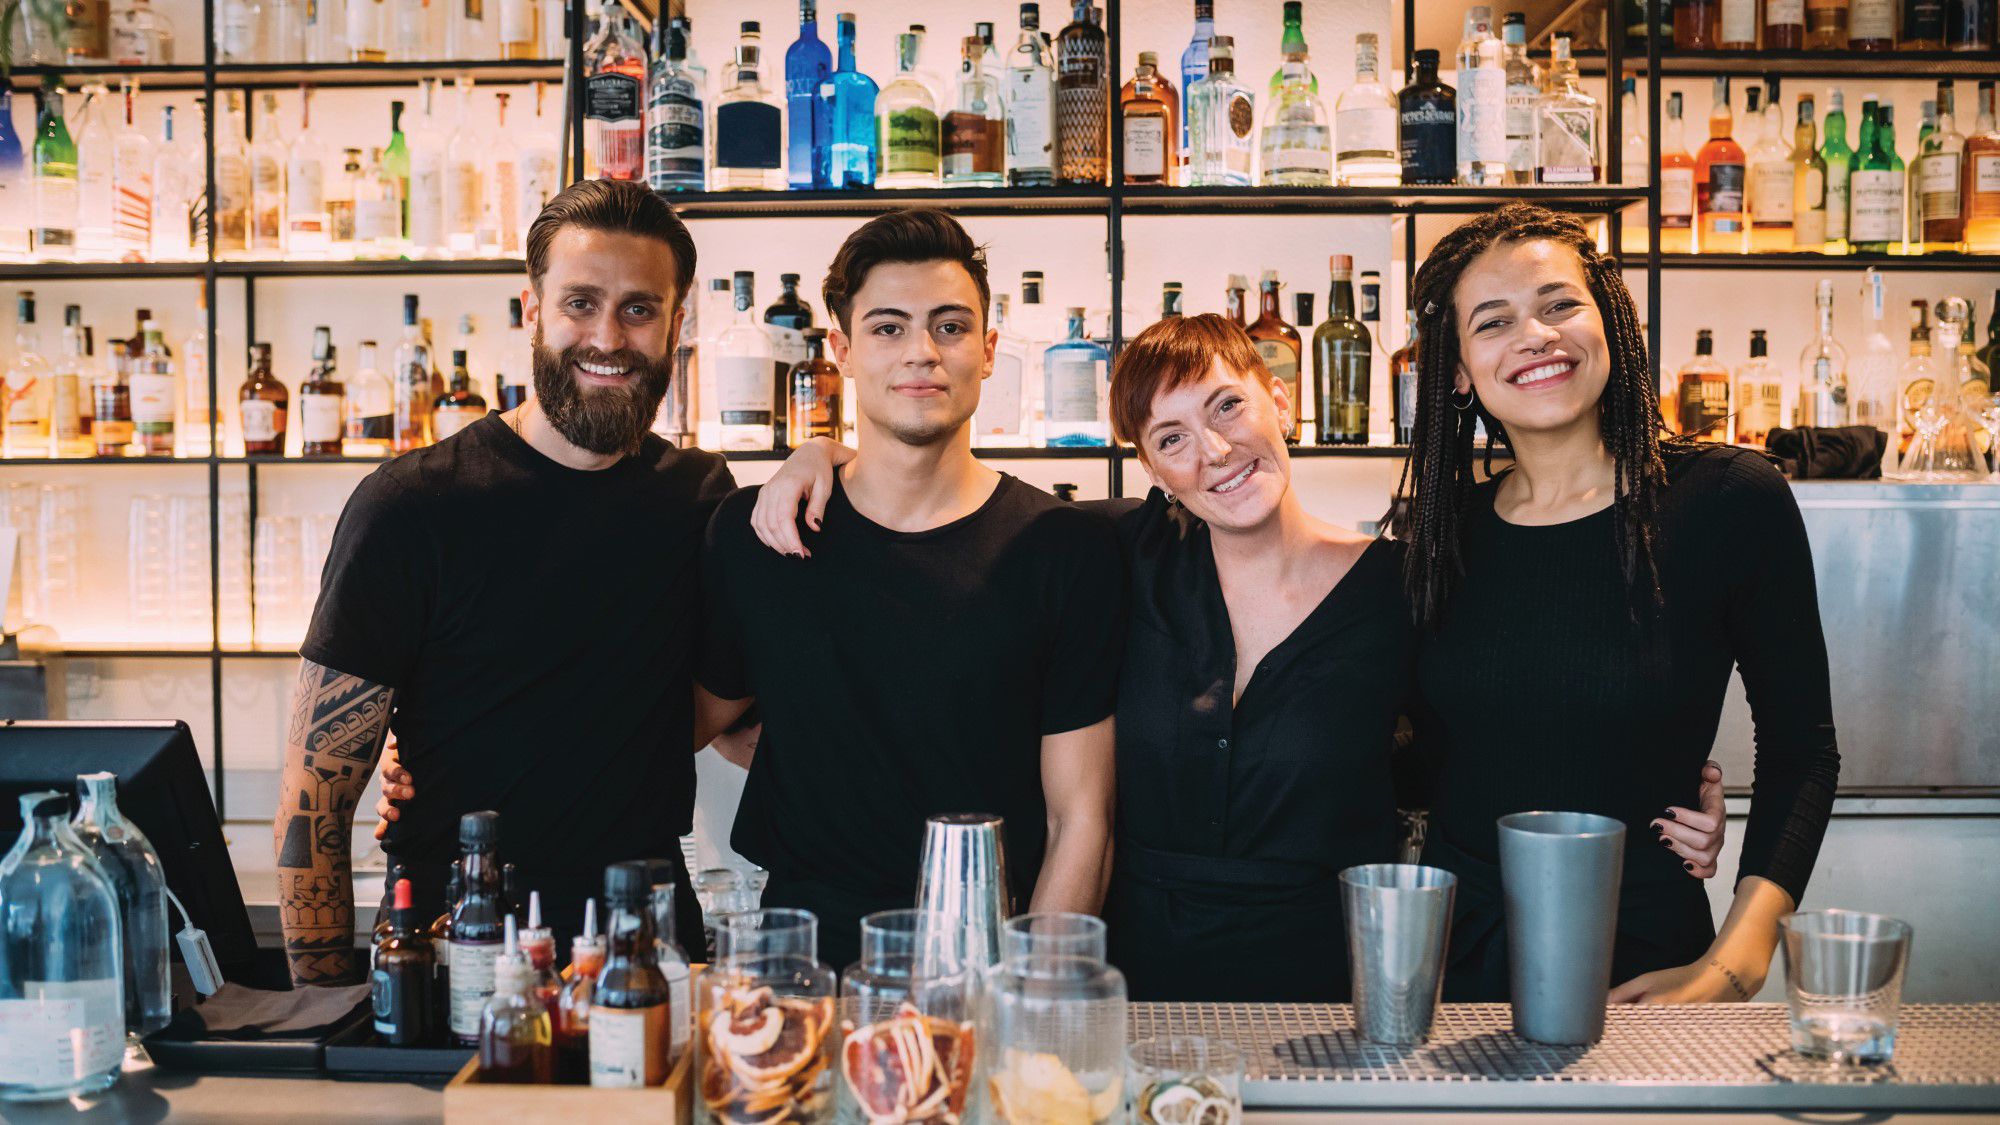 A happy team of bartenders standing behind a bar, smiling confidently at the camera.